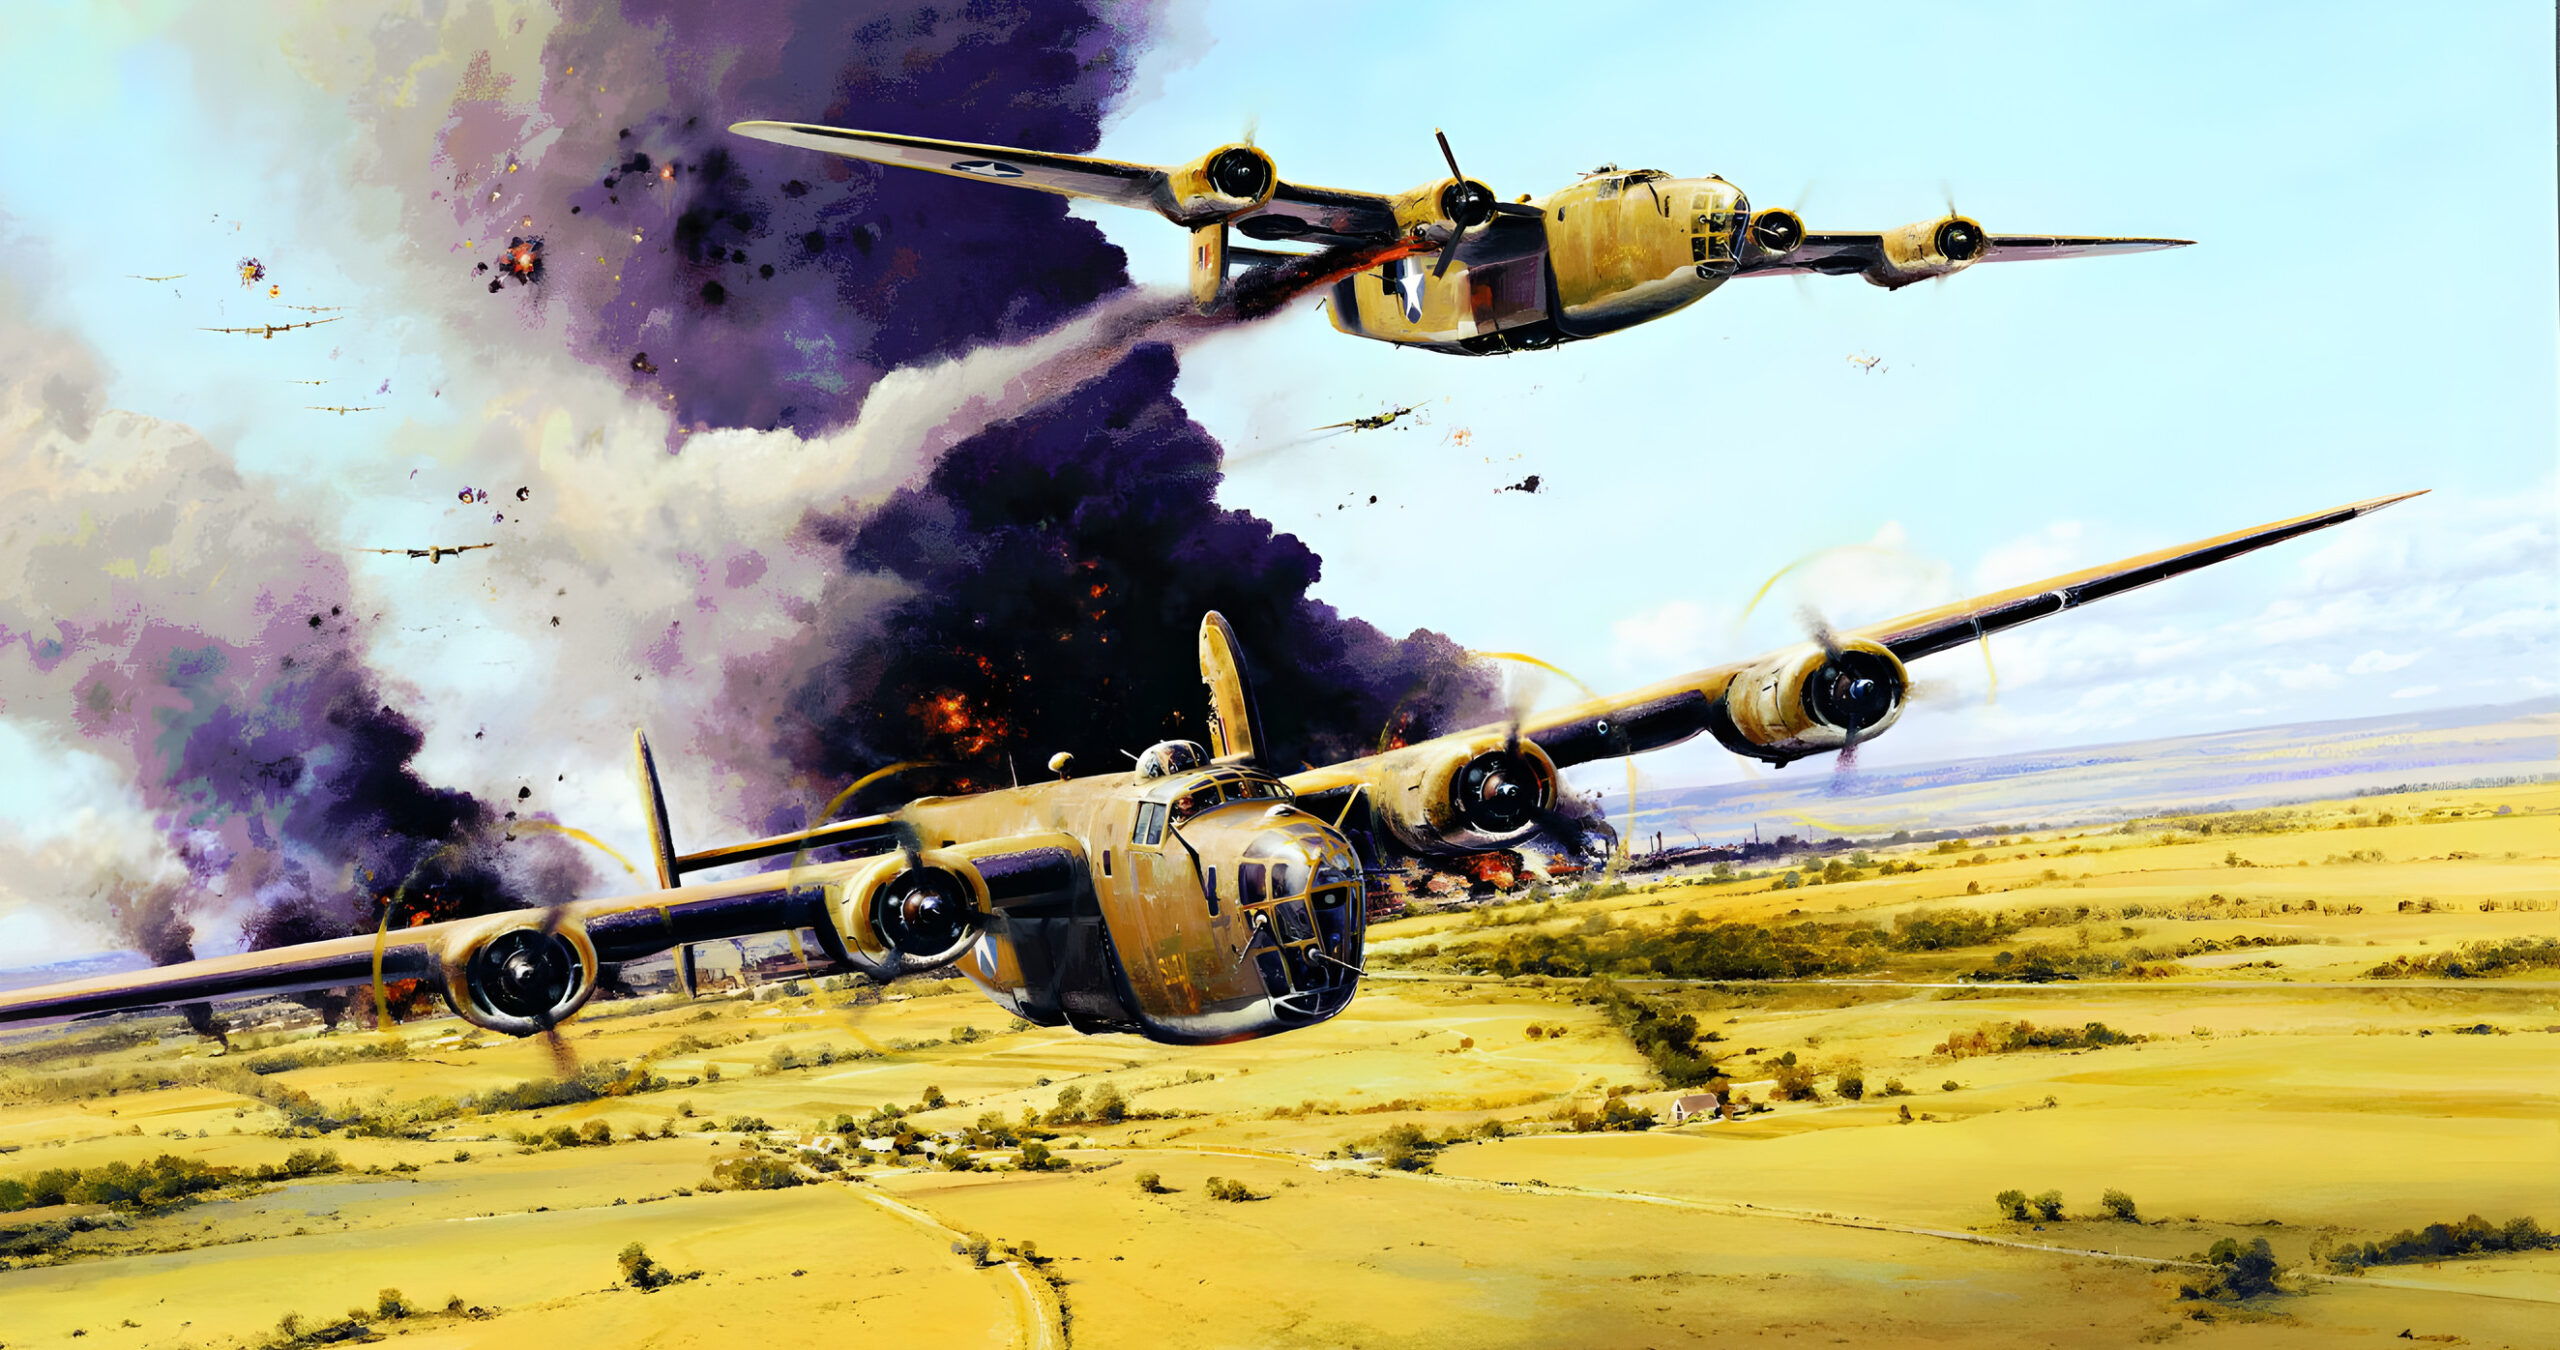 B-24 Liberators of the U.S. Fifteenth Air Force, one with an engine on fire, streak away from the Ploesti refineries they have just bombed in a painting by Robert Taylor.